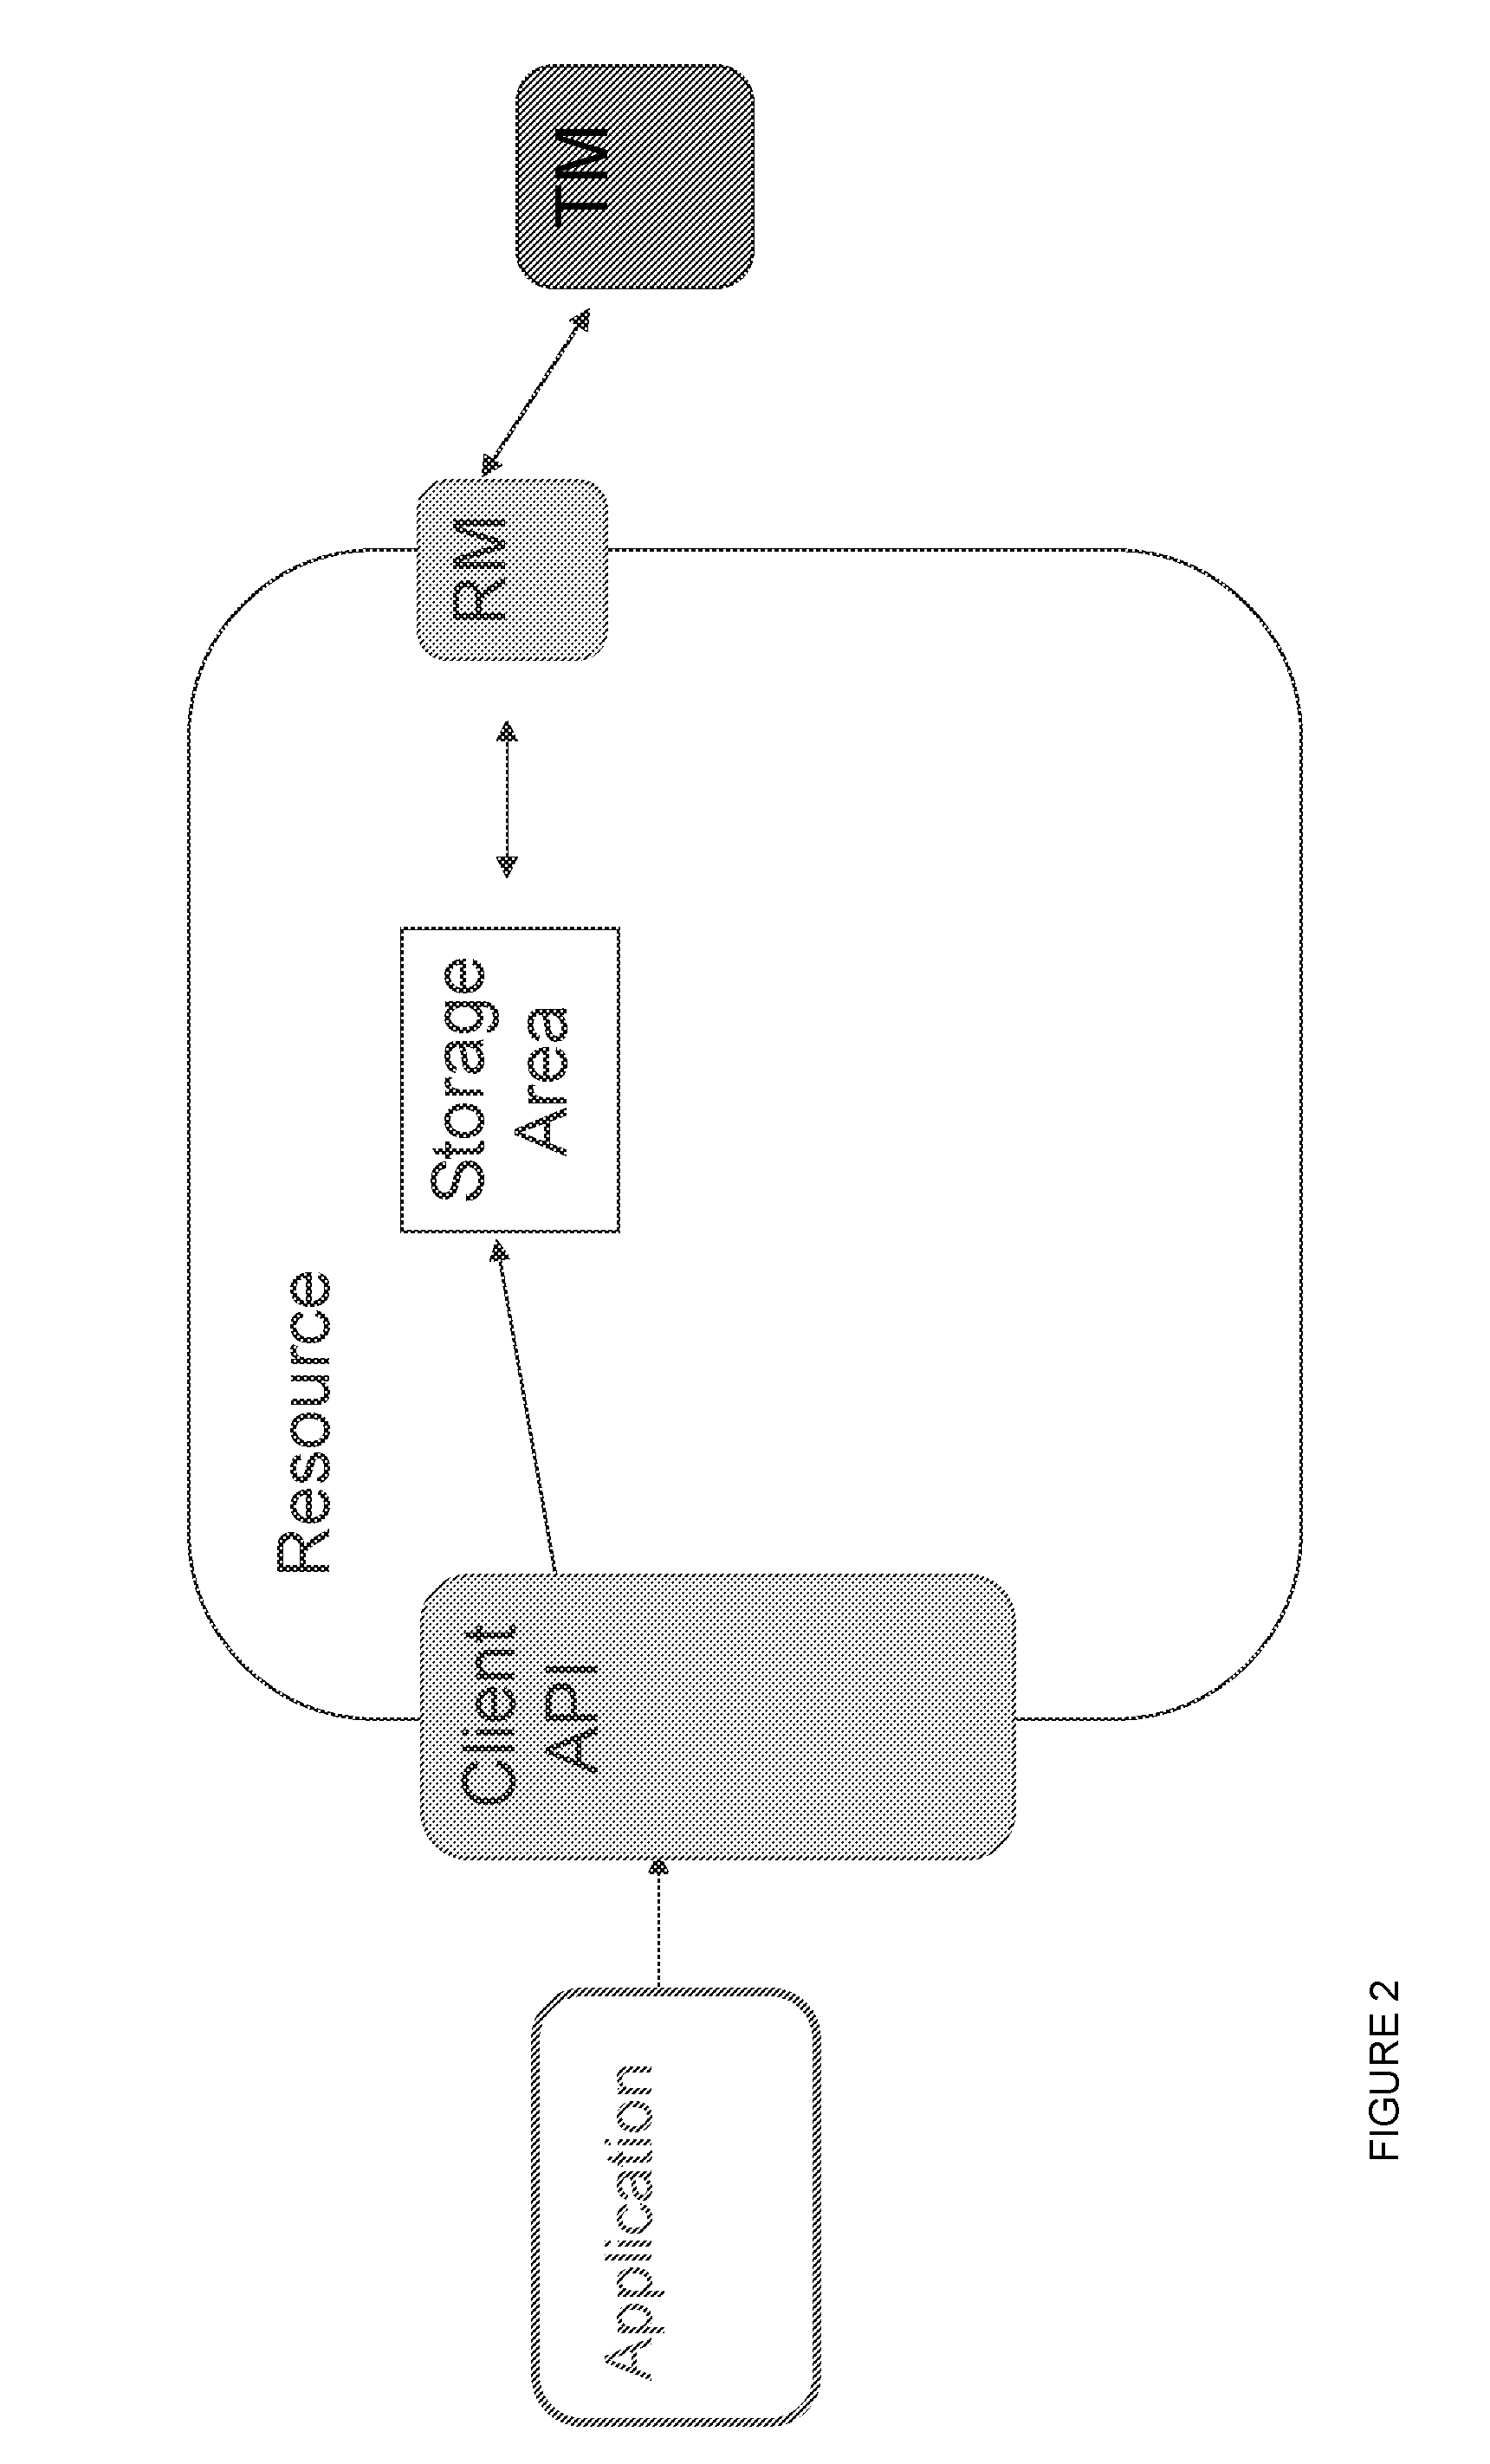 Combining scalability across multiple resources in a transaction processing system having global serializability